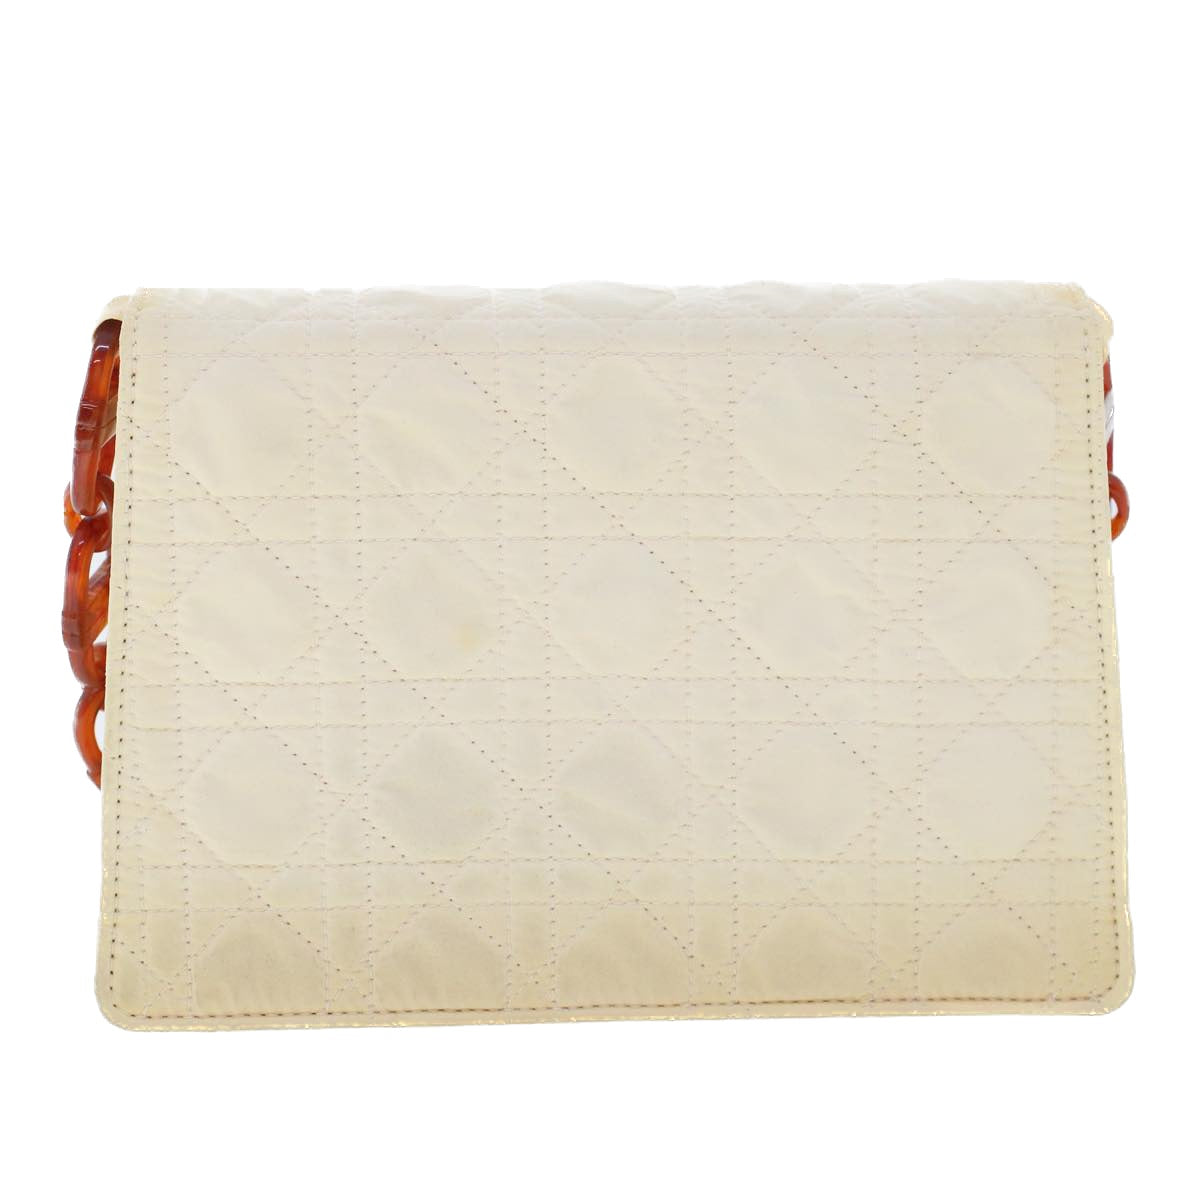 Christian Dior Quilted Canage Shoulder Bag Nylon White Auth 49813 - 0